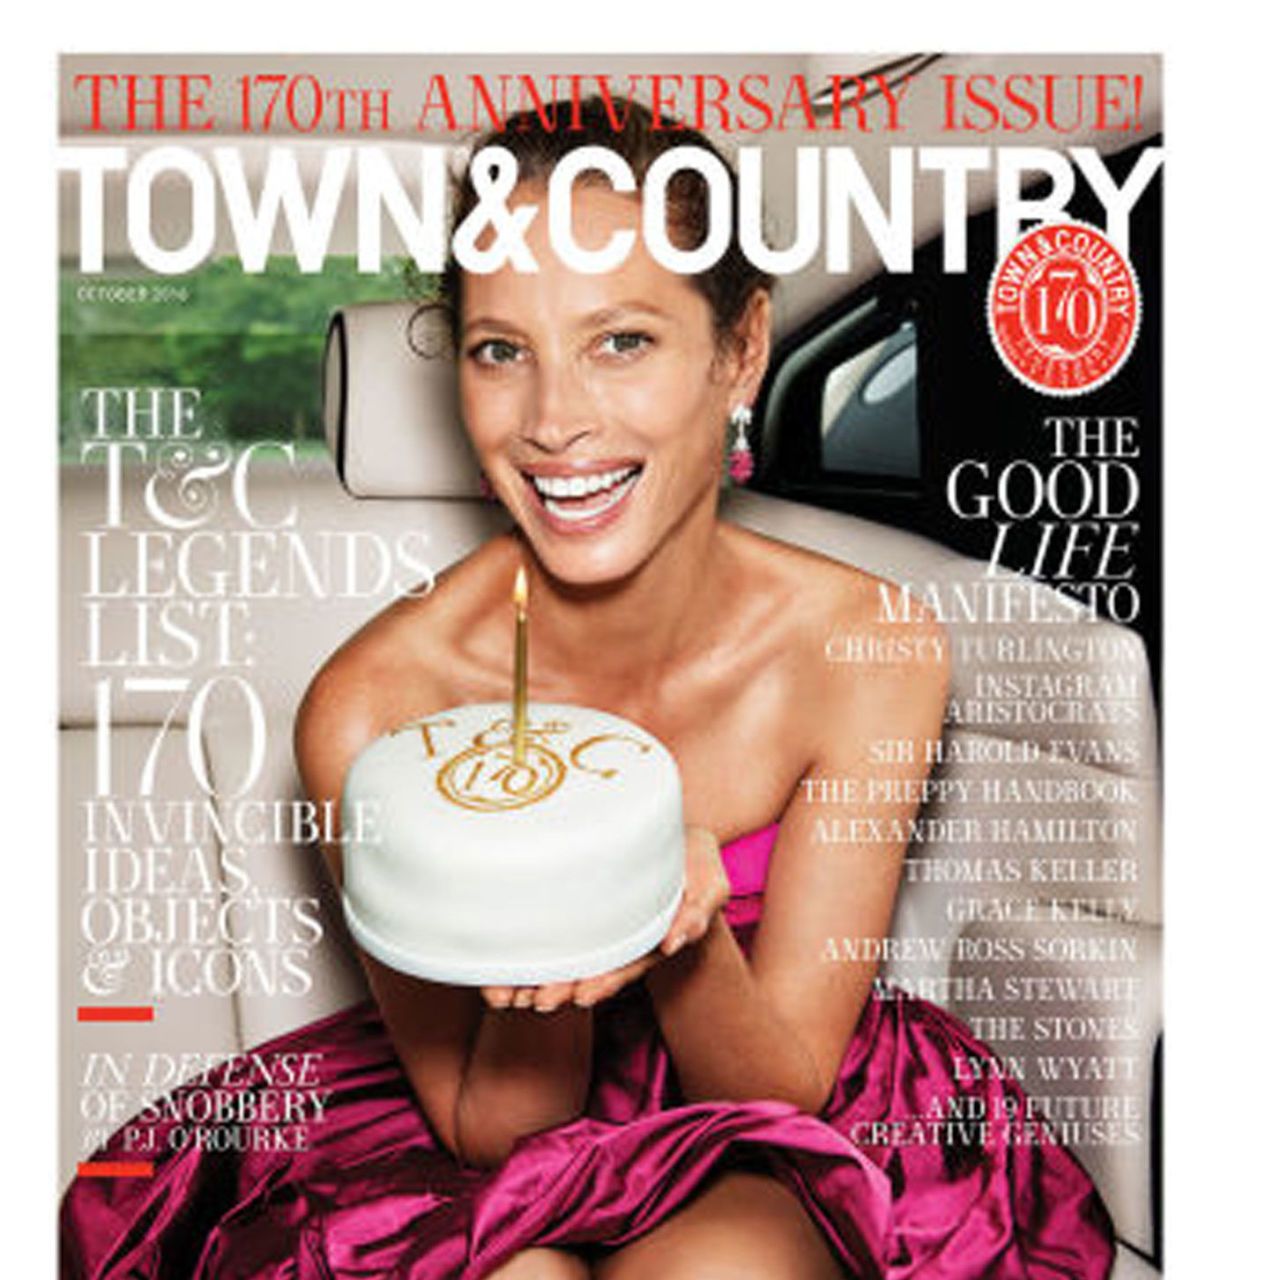 Town & Country's 170th Anniversary - History of Town & Country